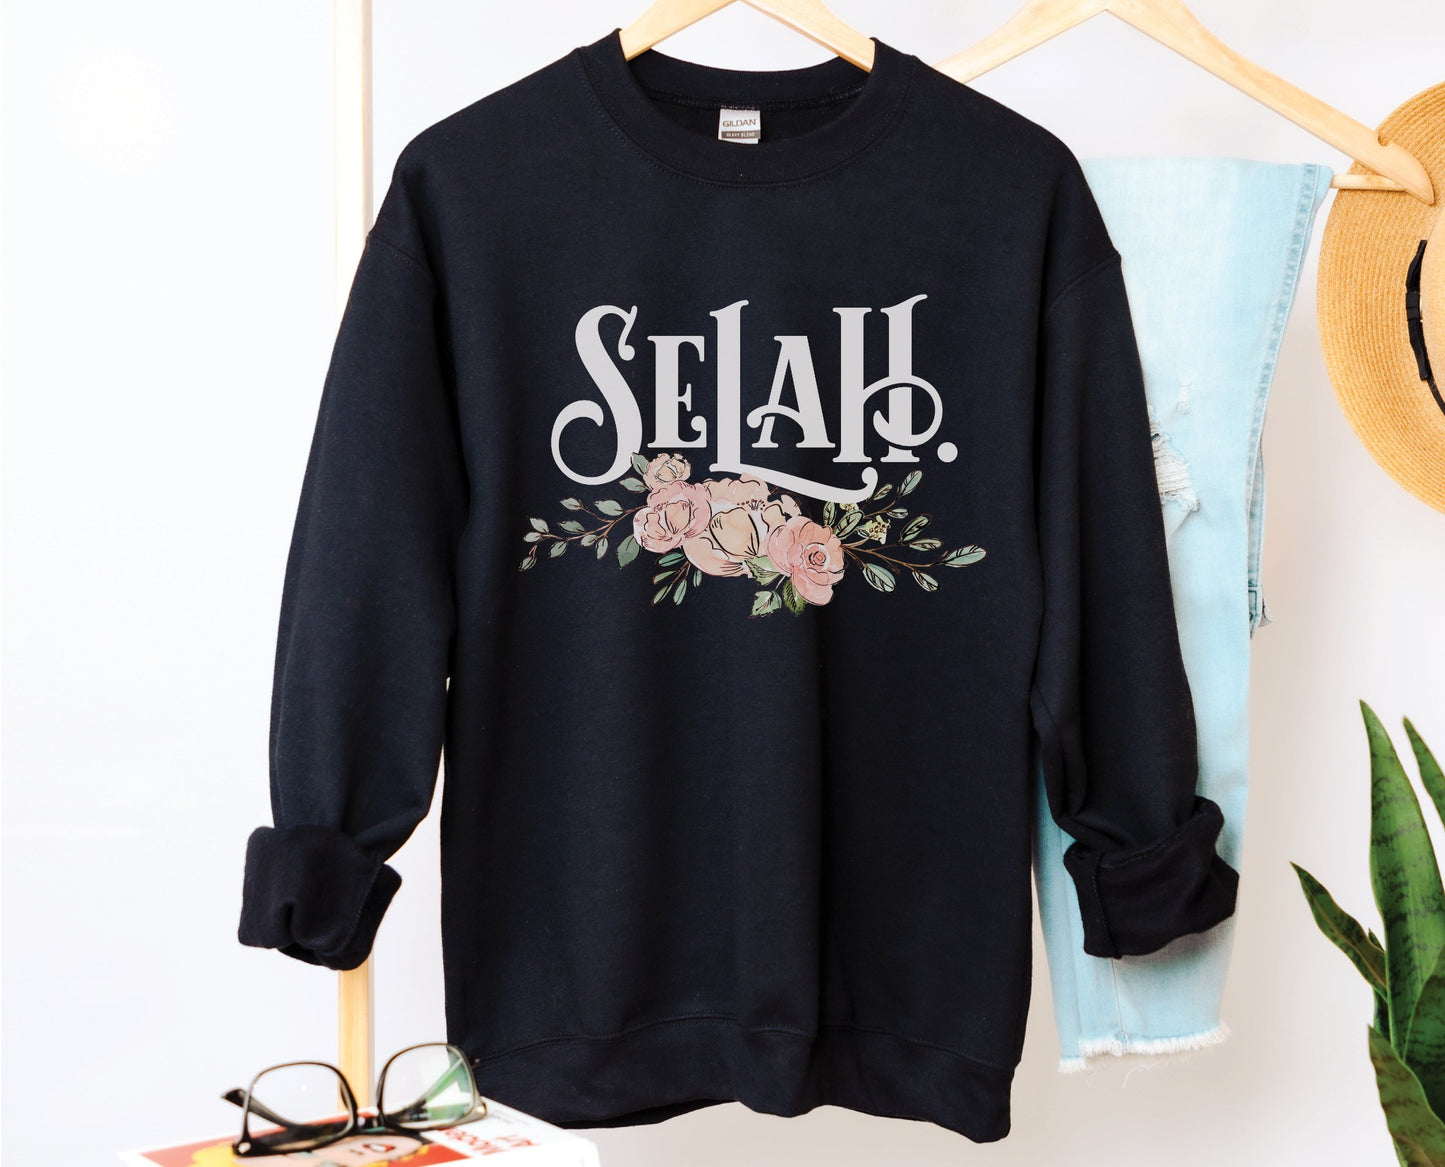 Selah Psalm watercolor floral Christian aesthetic design printed in white, peach, blush pink, and sage green on cozy black unisex crewneck sweatshirt for women